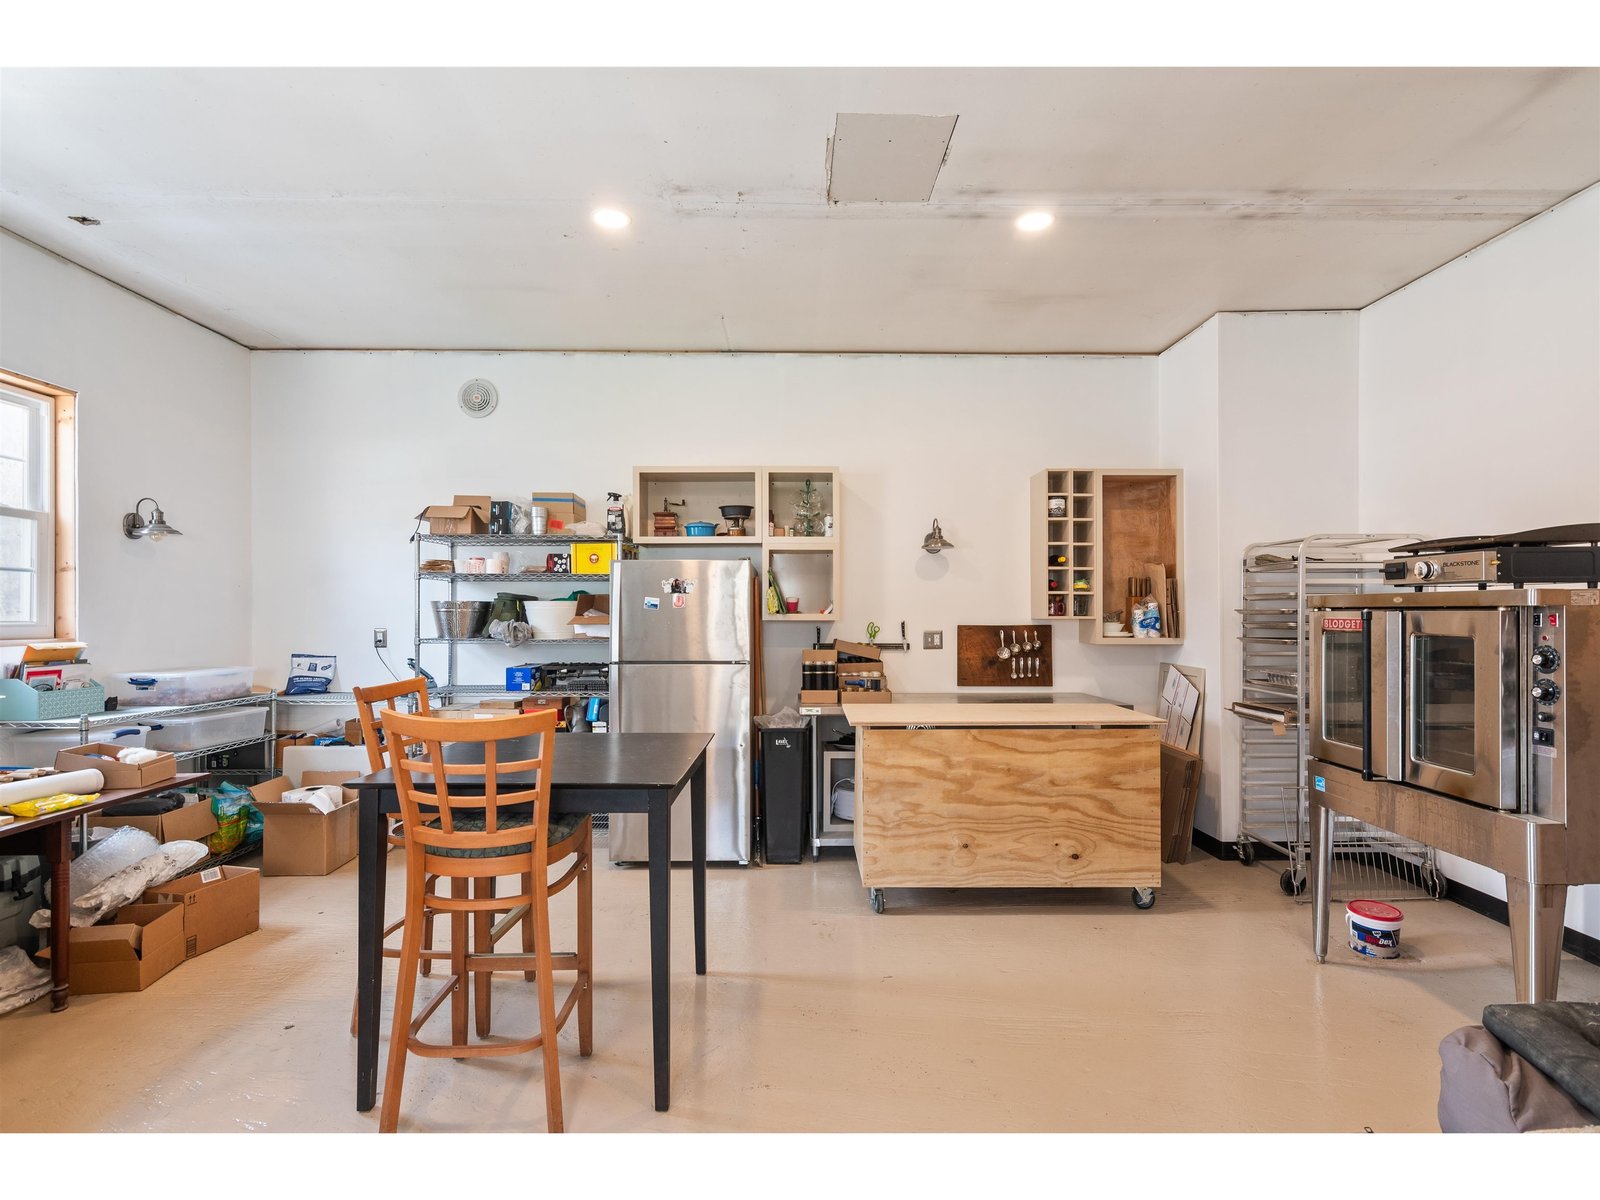 Commercial Kitchen space (secondary building)